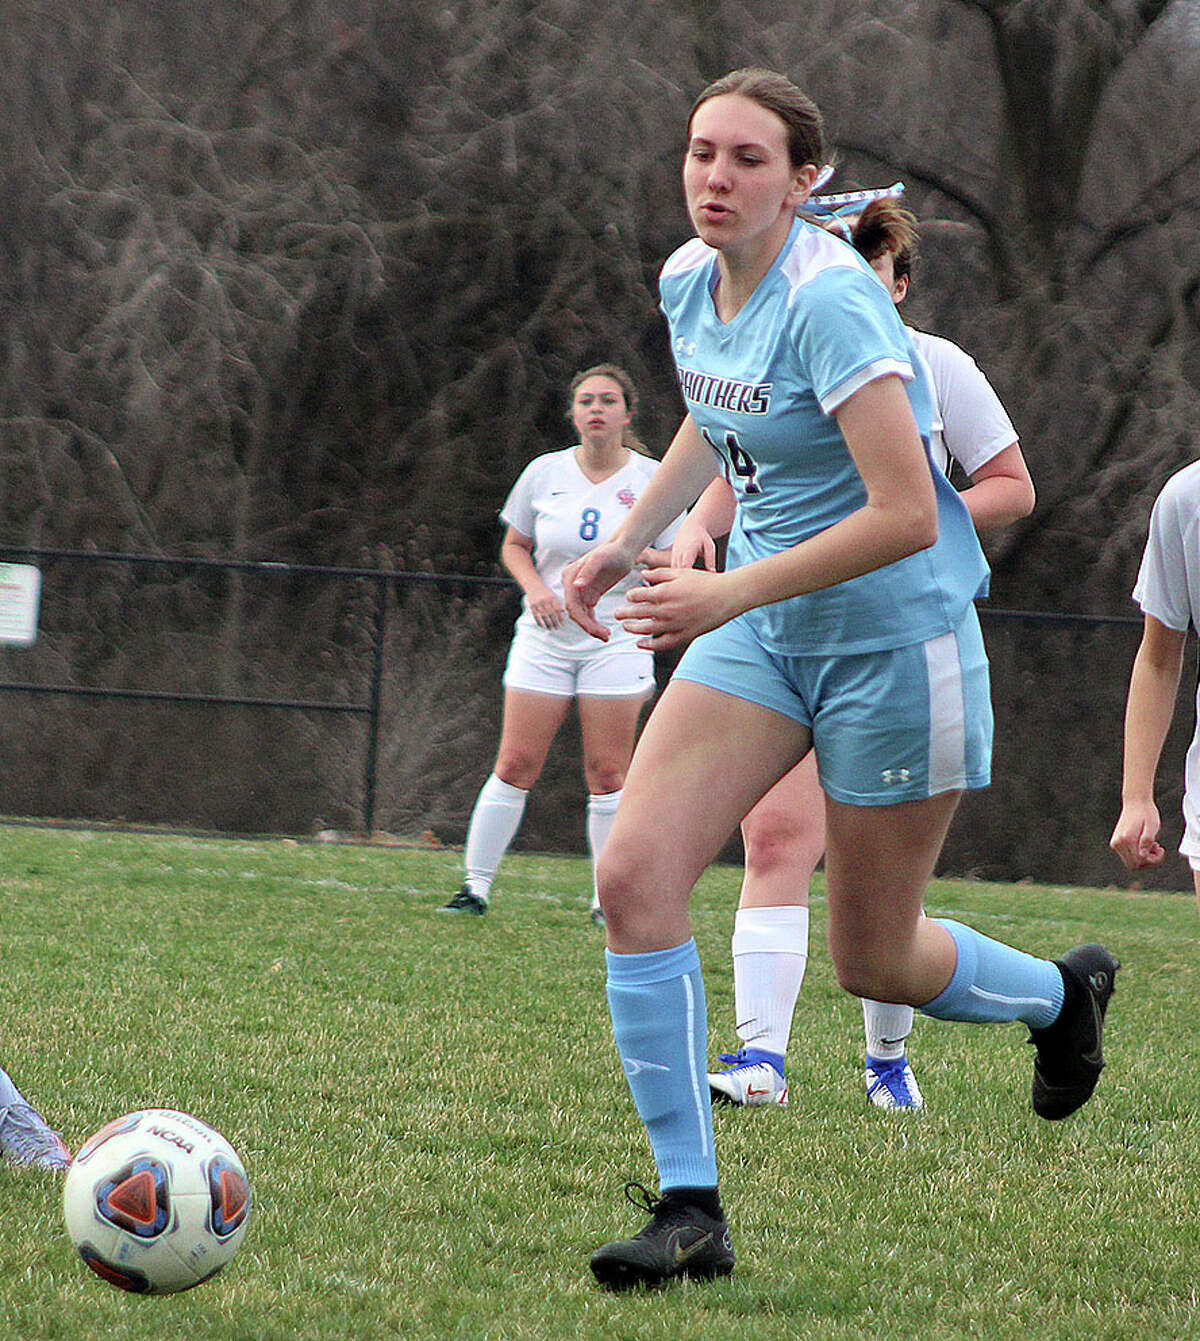 Jersey's Maddie Hedger scored a goal in her team's 2-1 win on Friday over Metro-East Lutheran in Edwardsville. Later Friday, Jersey won a 2-1 decision in a 7 p.m. game at Gillespie.